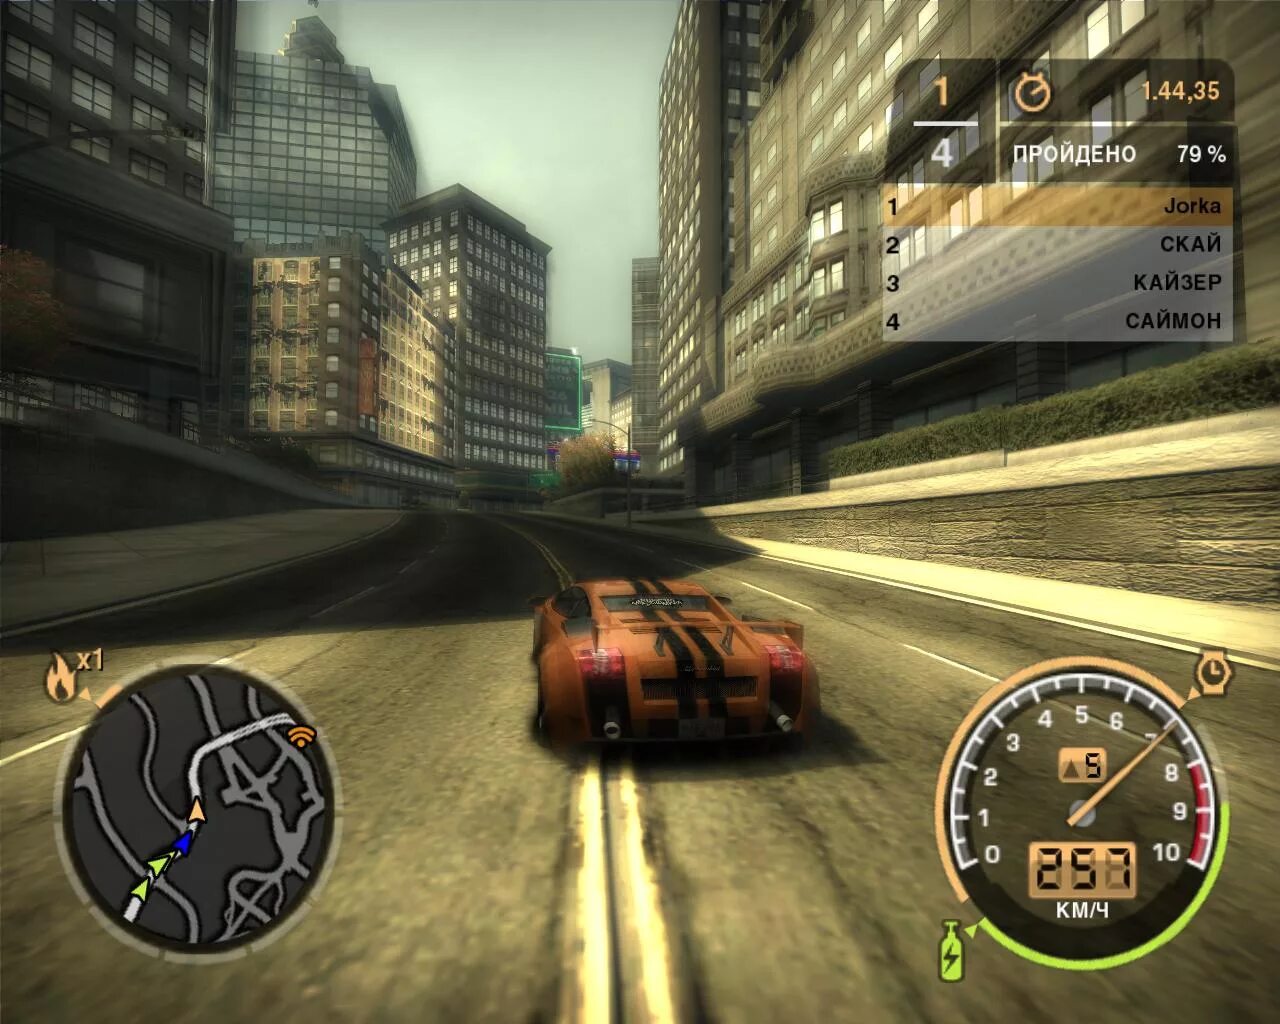 NFS most wanted 2005. NFS most wanted 2005 mobile Android. NFS MW 2005 Android. NFS most wanted 2005 на андроид. Нид фор спид 2005 на телефон